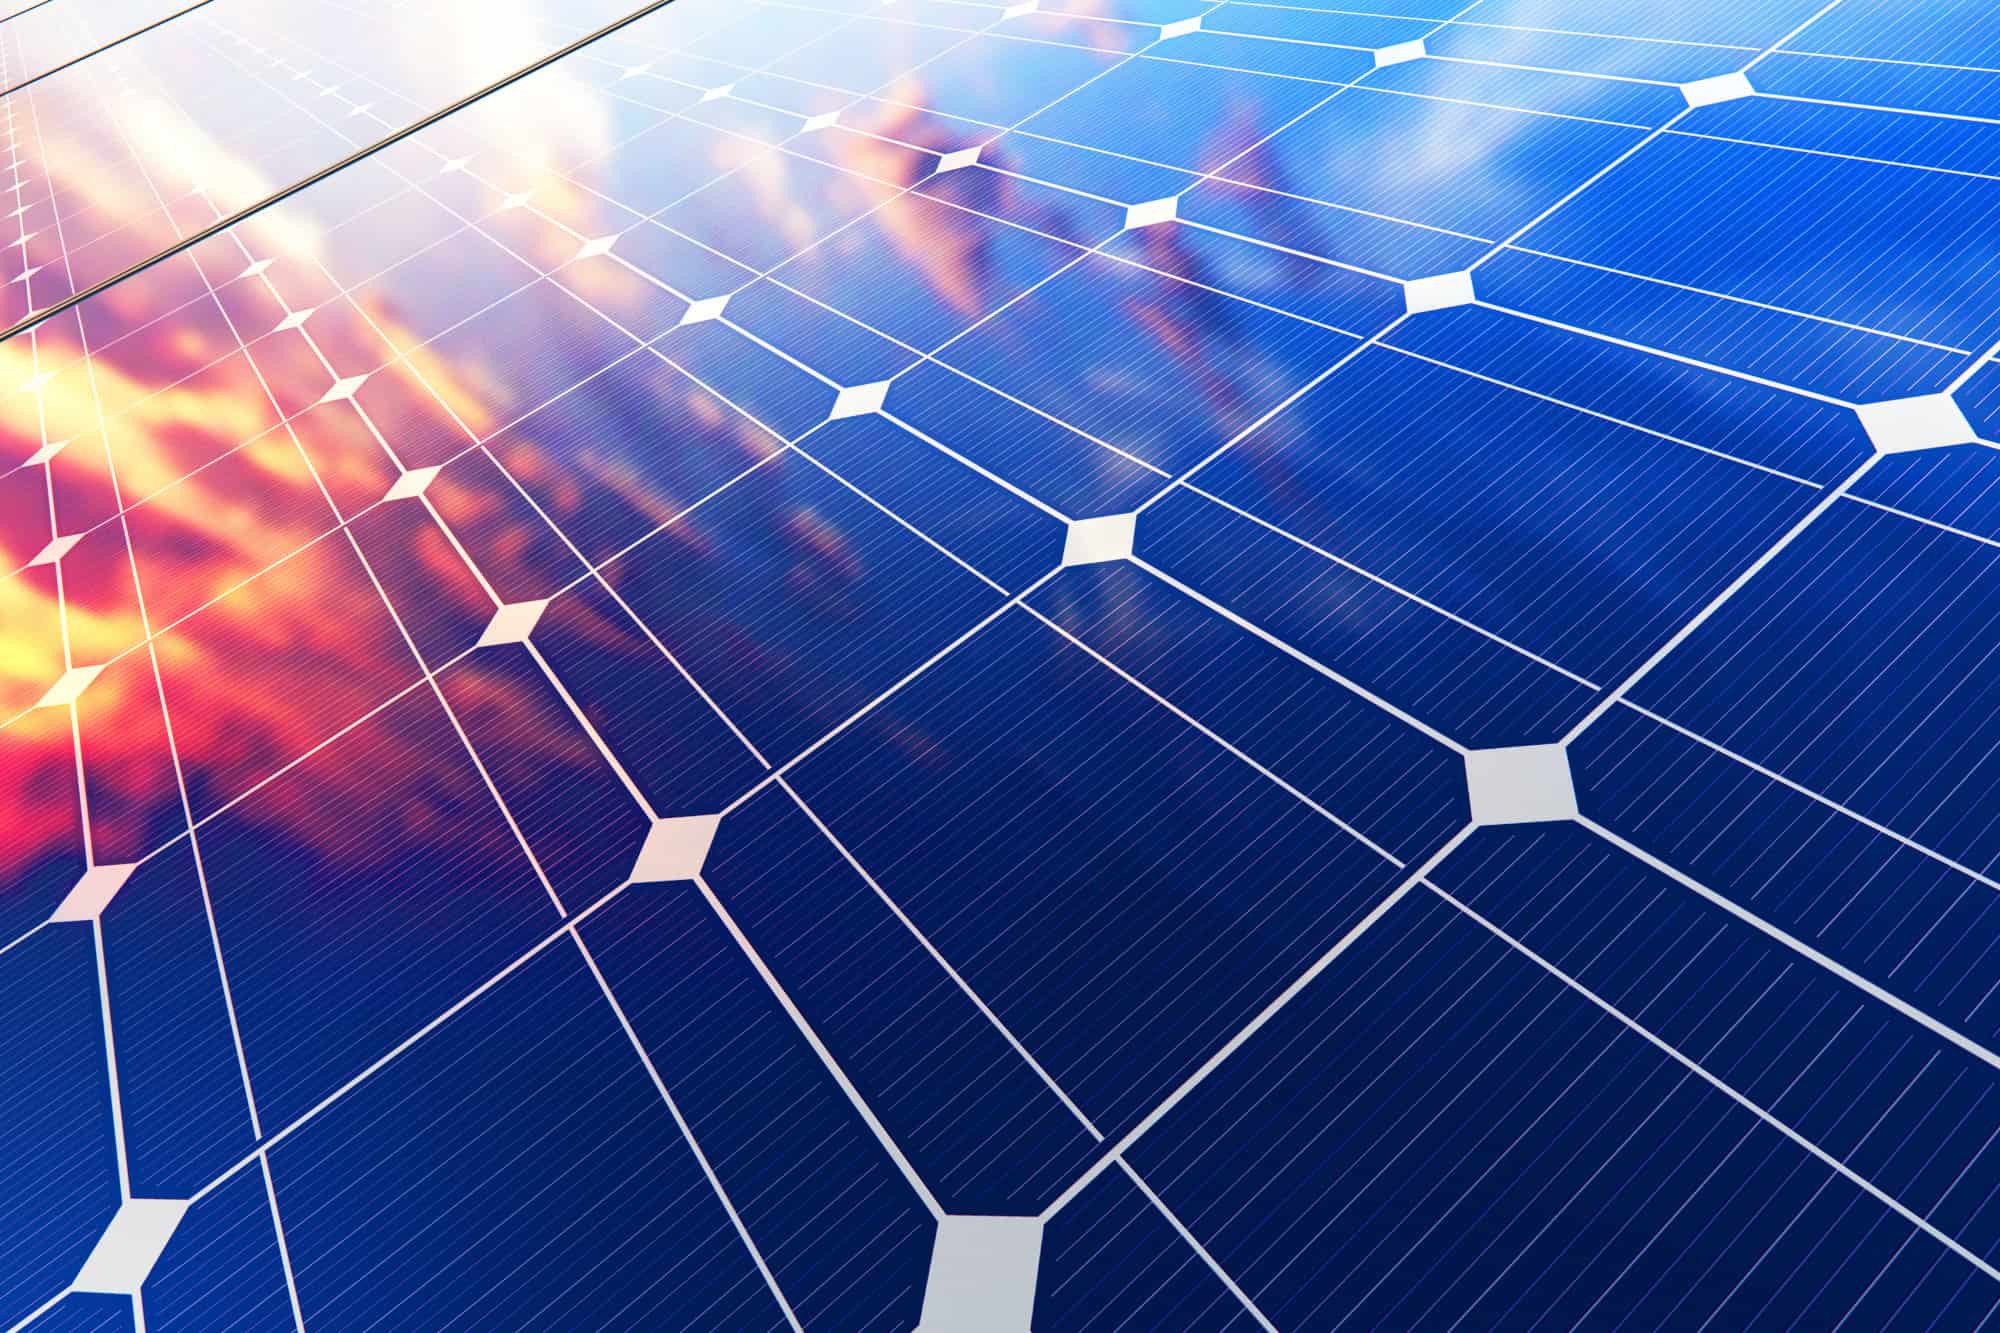 Using solar power for commercial buildings